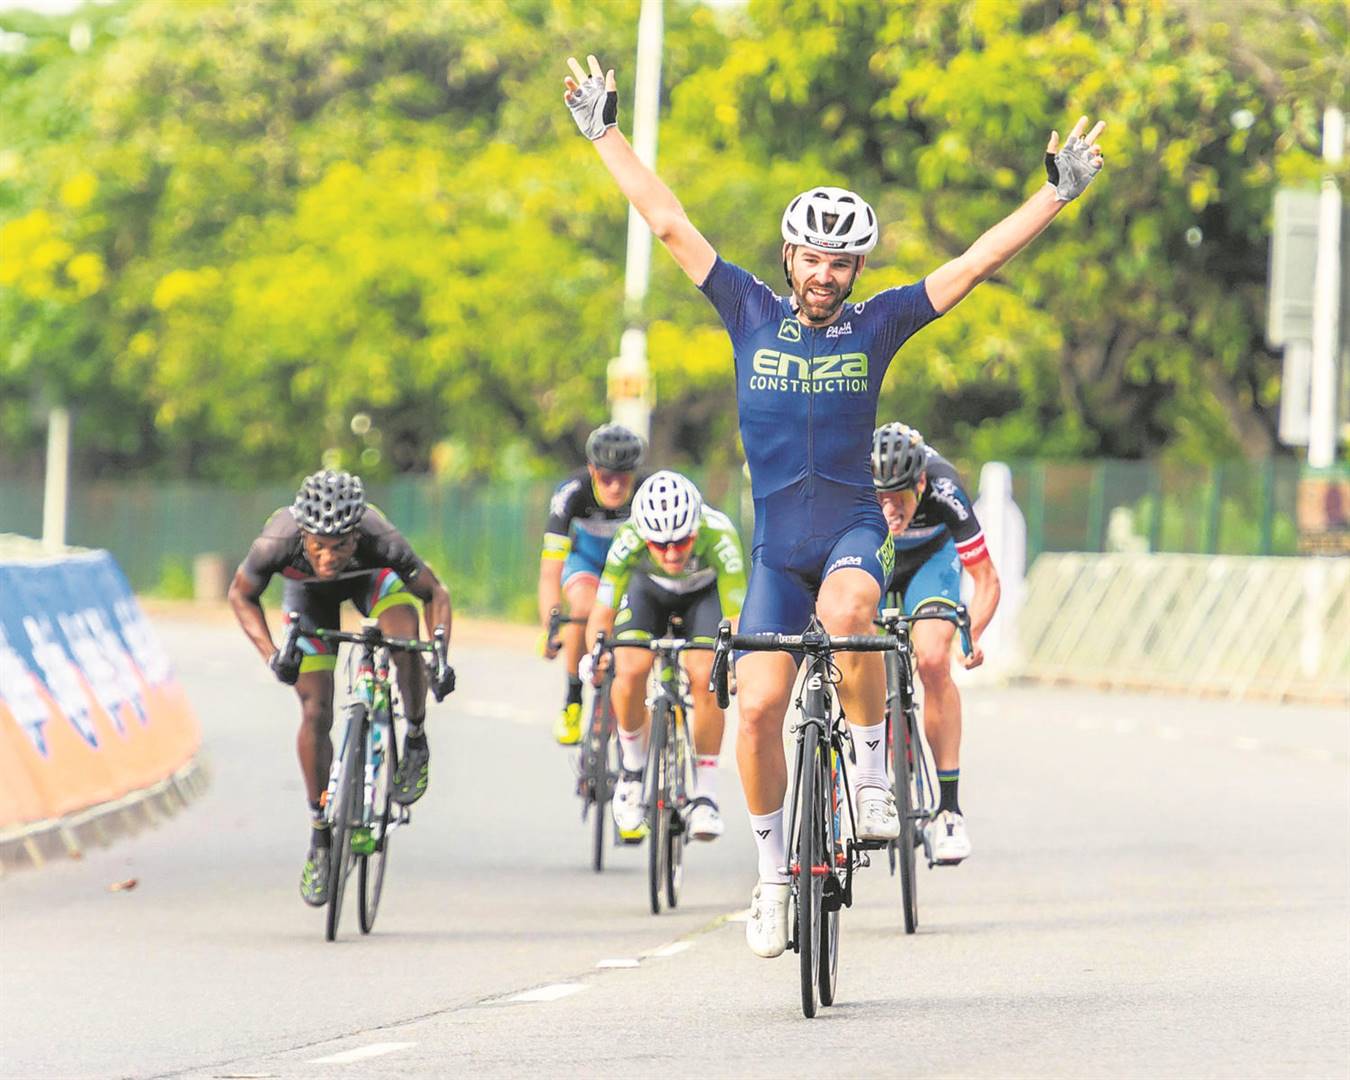 2019 aQuellé Tour Durban champion Steven van Heerden will be back with Team Enza for the defence of their title on Sunday.